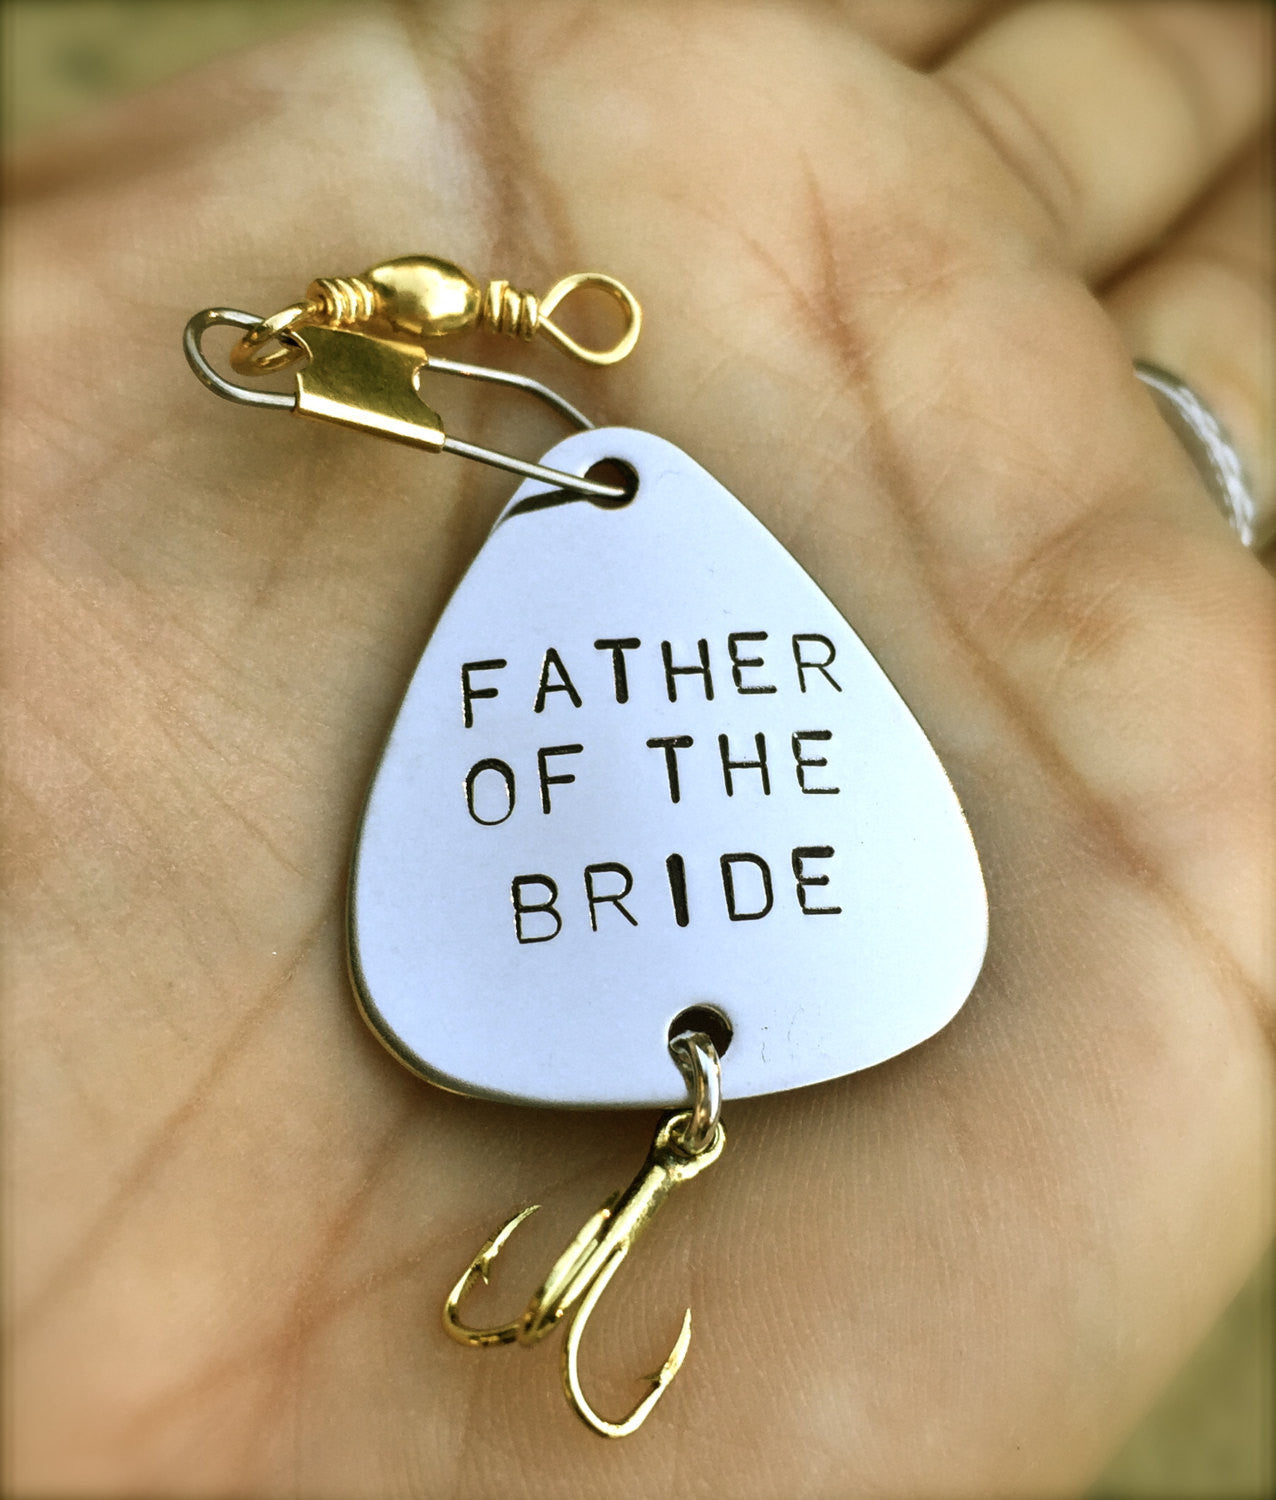 Fishing Lures,Father Of the Bride Fishing Lure, Valentine Gift